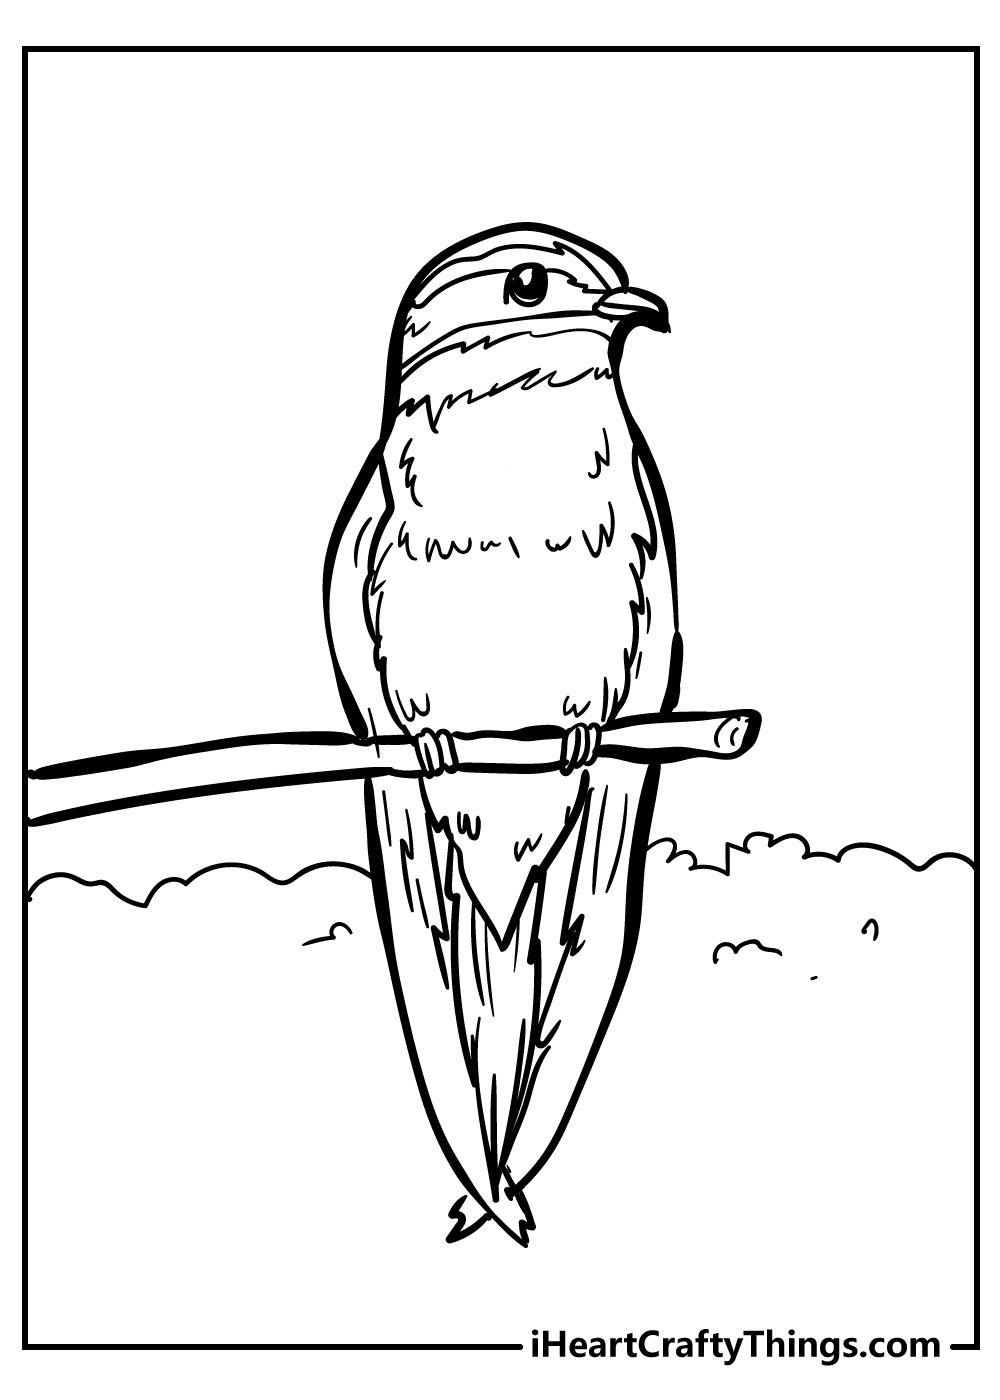 Bird Coloring Pages free pdf download